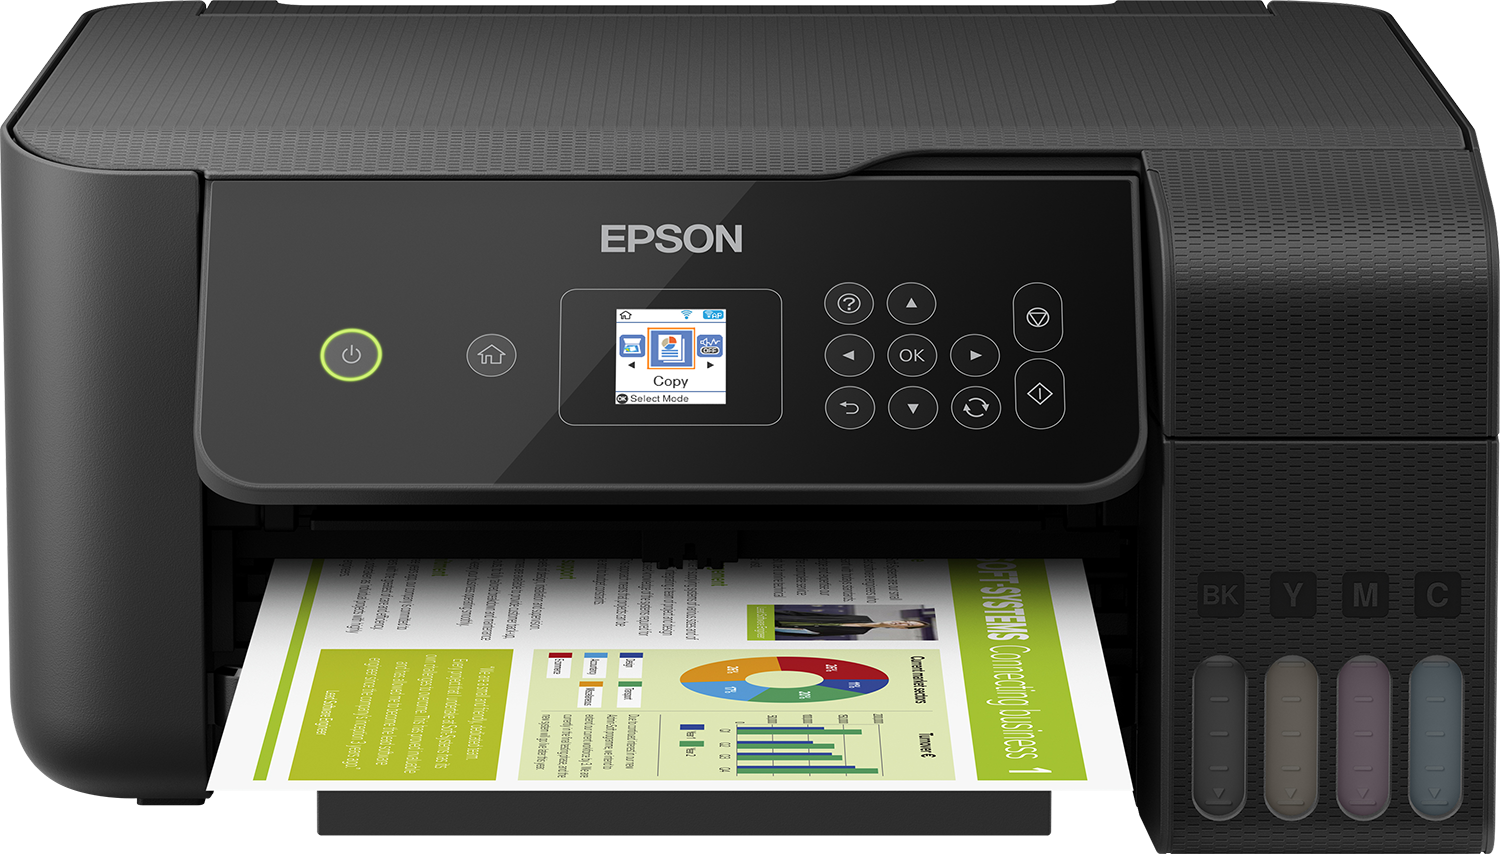 Ecotank L3160 Consumer Inkjet Printers Printers Products Epson Southern Africa 4793